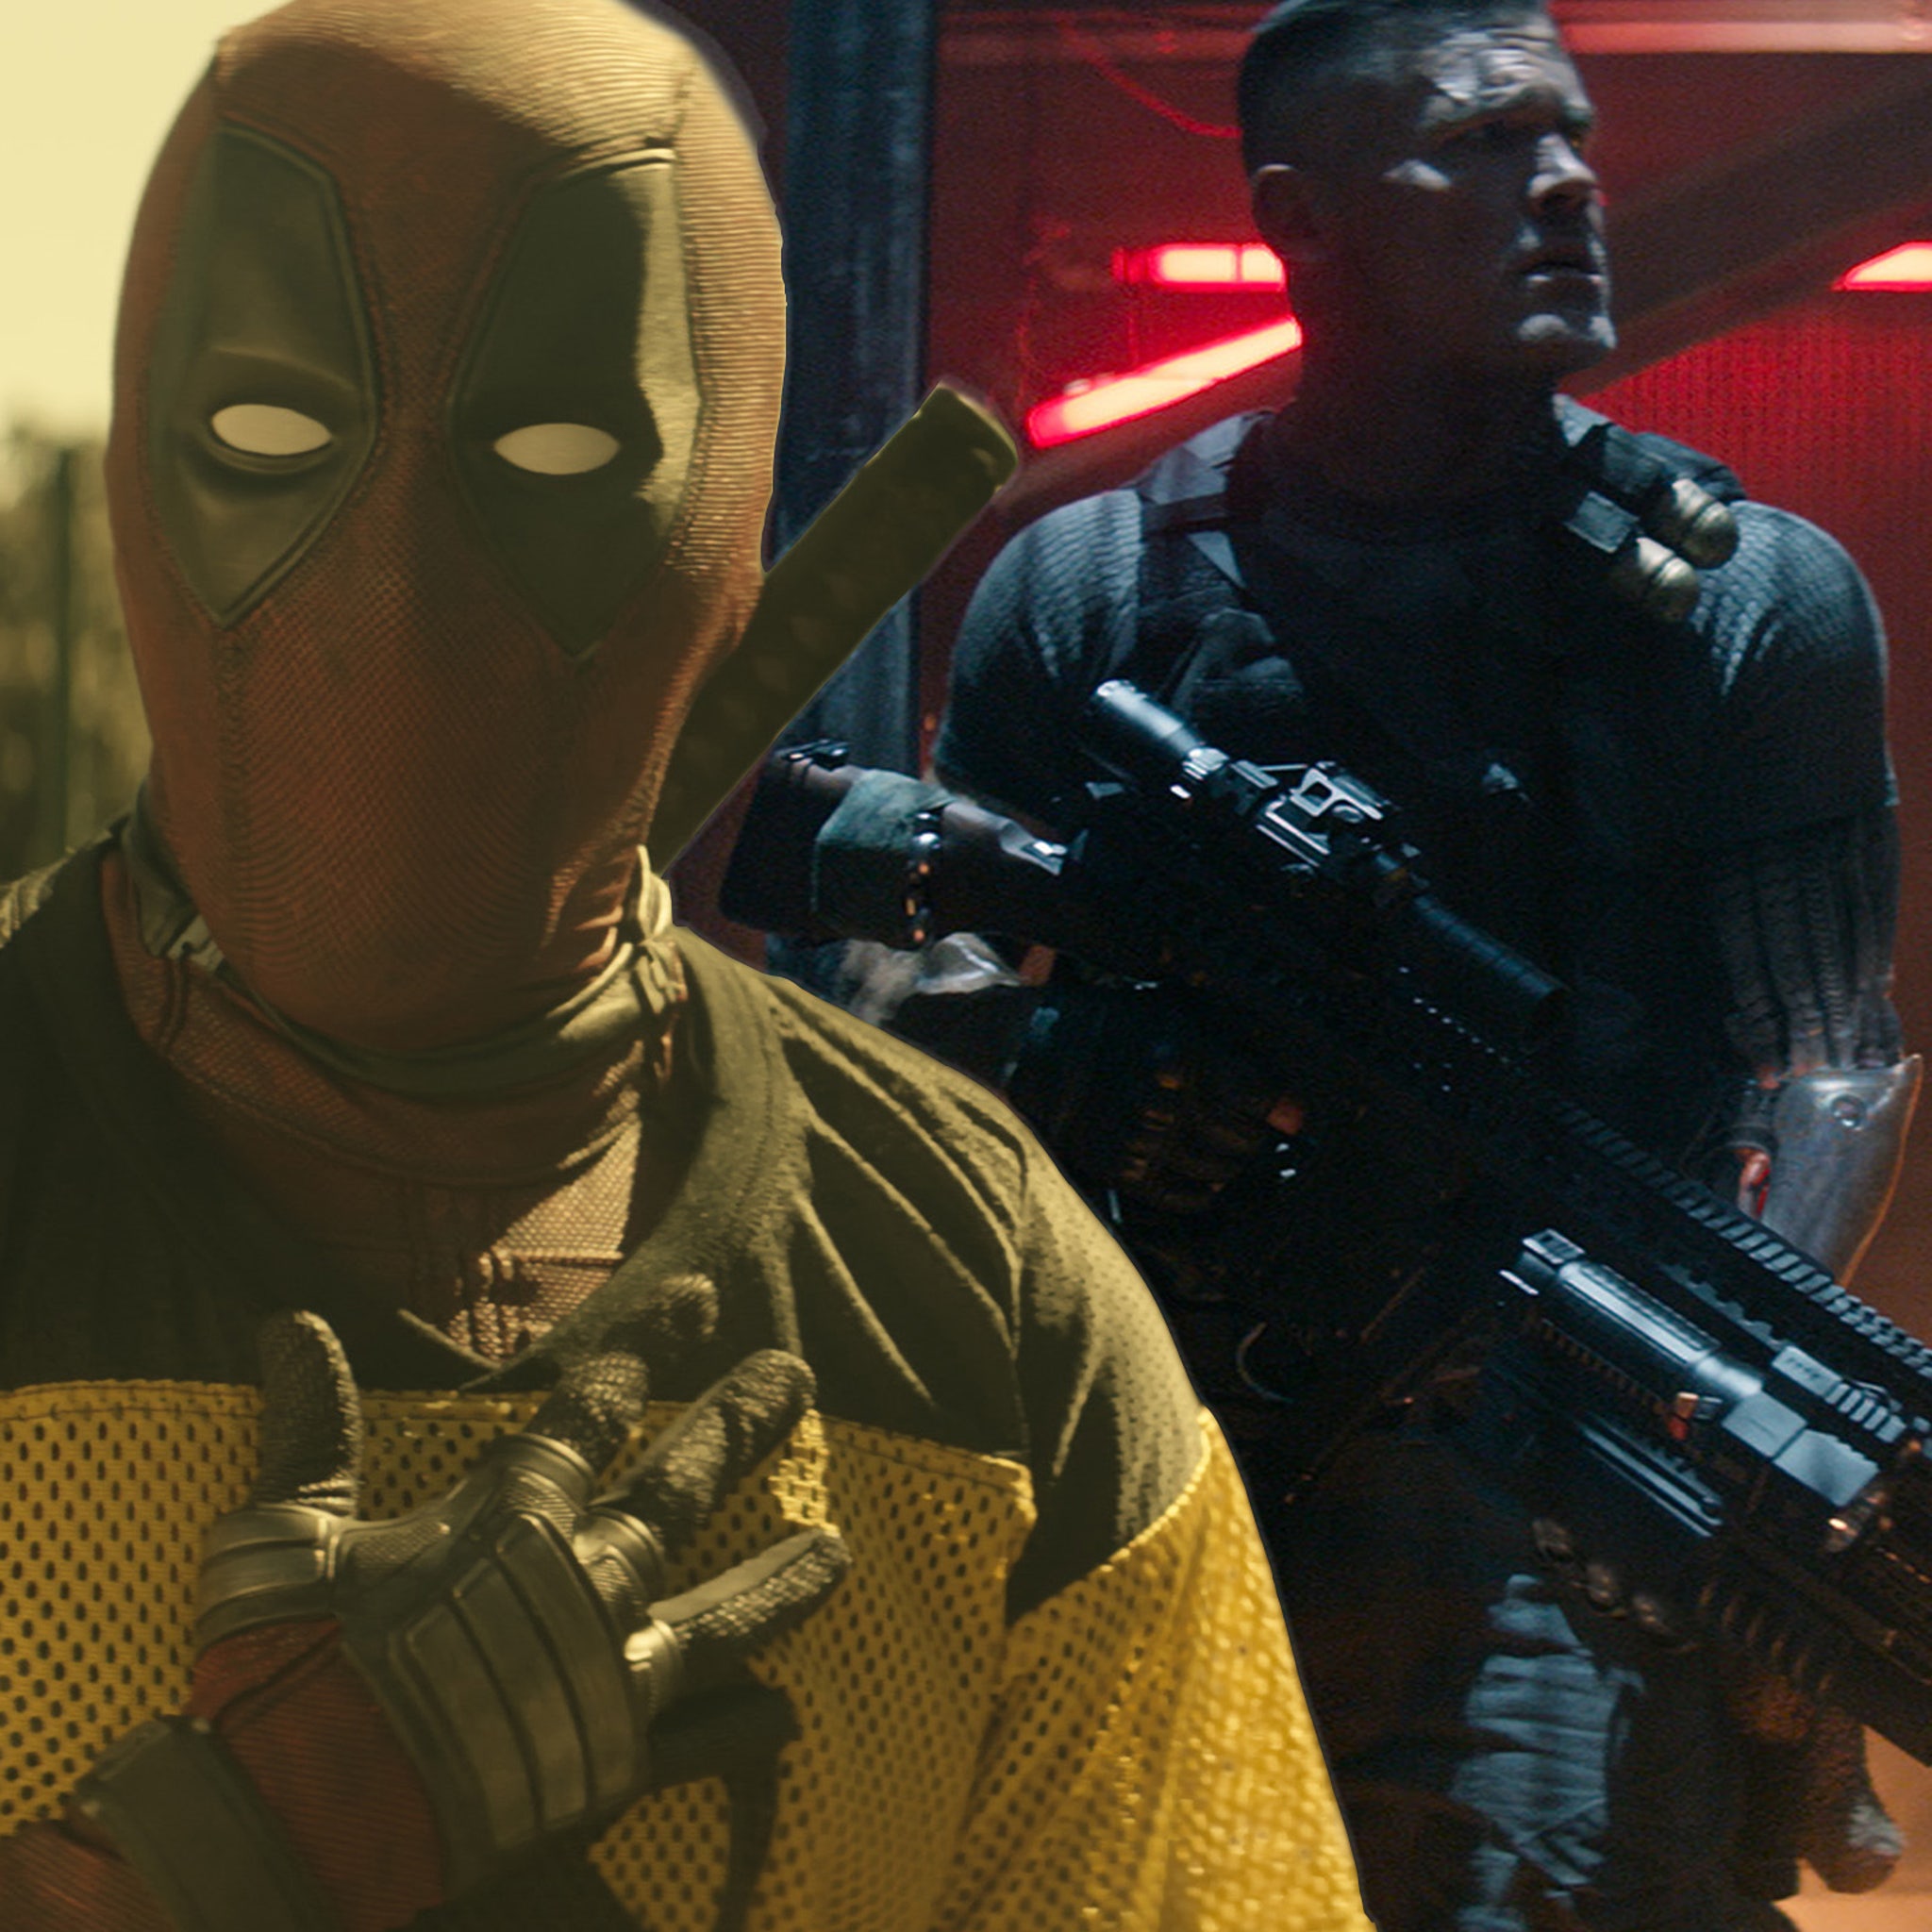 Deadpool 2 Cast & Character Guide